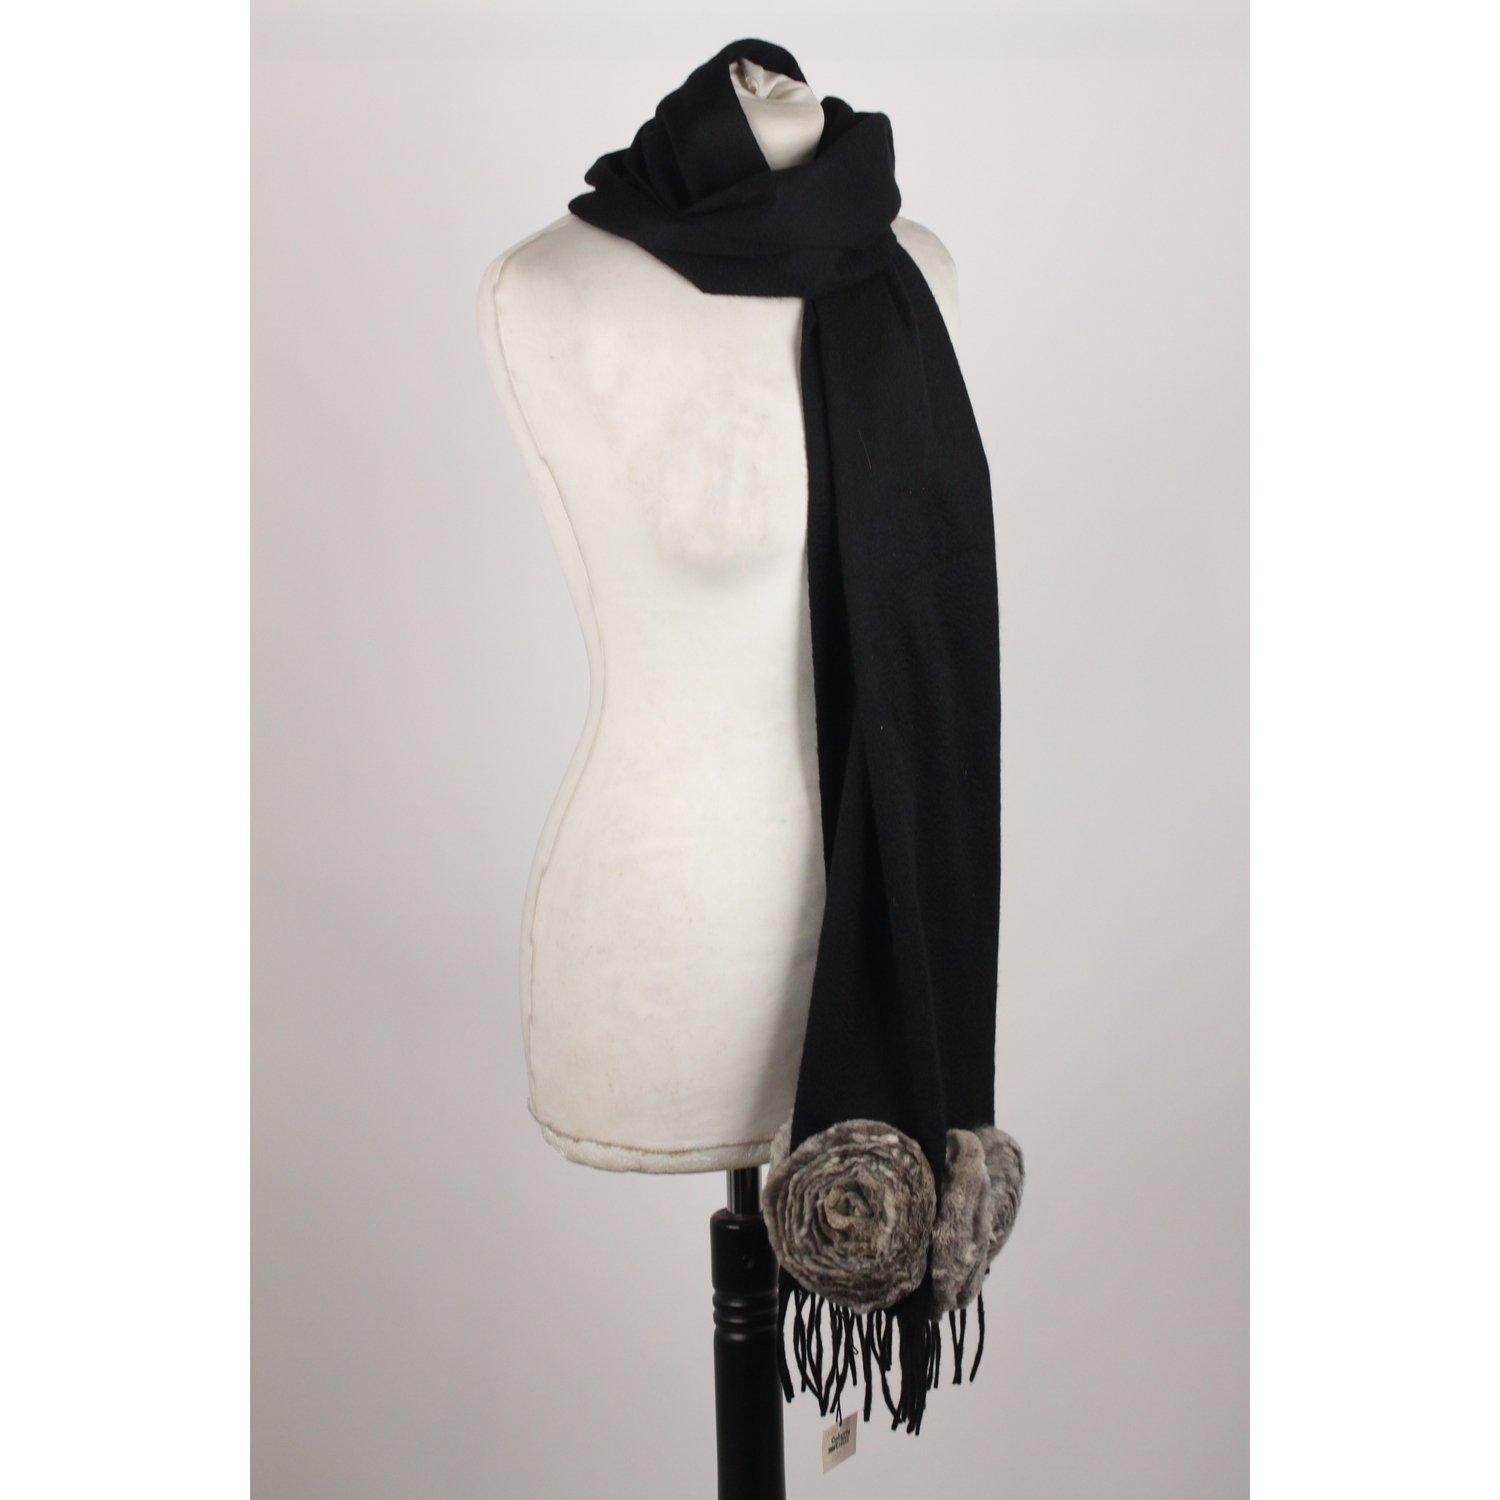 MATERIAL: Cashmere COLOR: Black MODEL: Fringed Scarf GENDER: Women SIZE: COUNTRY OF MANUFACTURE: Unknown Condition CONDITION DETAILS: A :EXCELLENT CONDITION - Used once or twice. Looks mint. Imperceptible signs of wear - Internal Ref: -